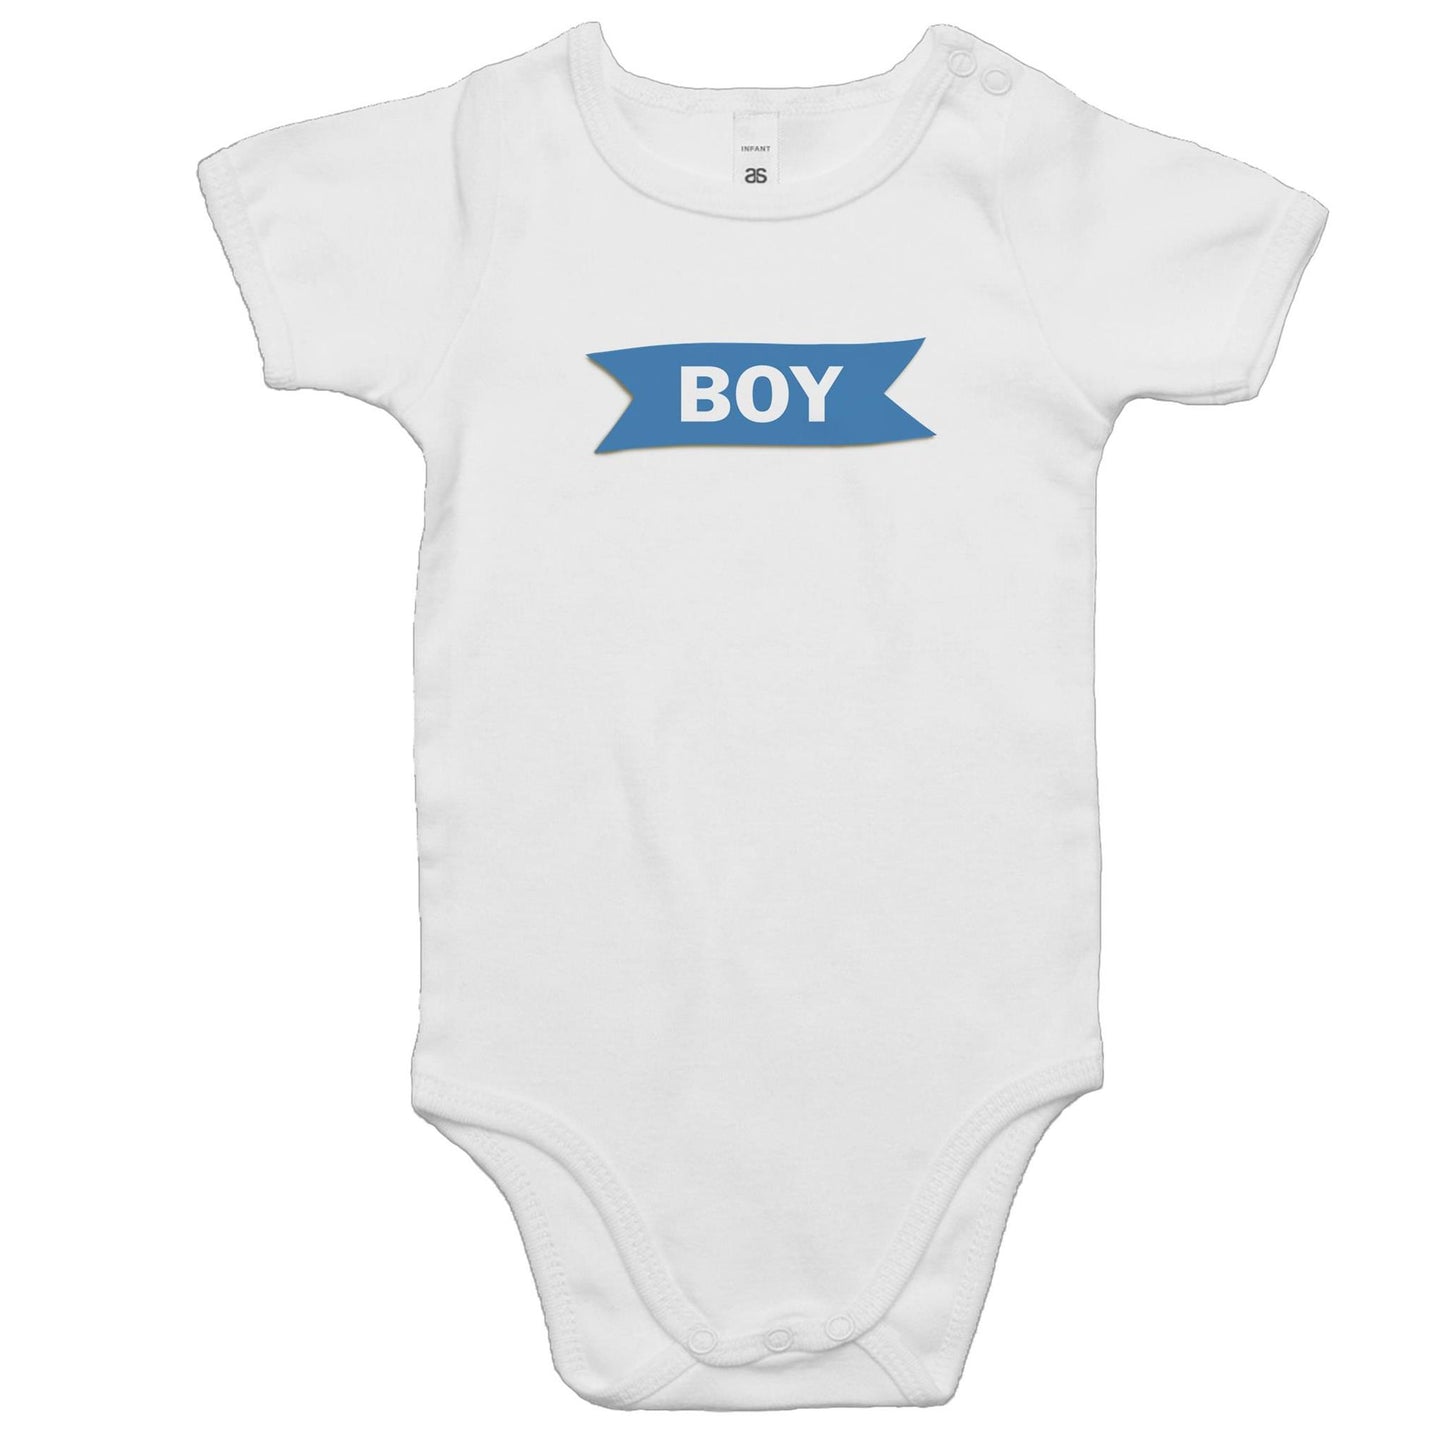 Boy Rompers for Babies